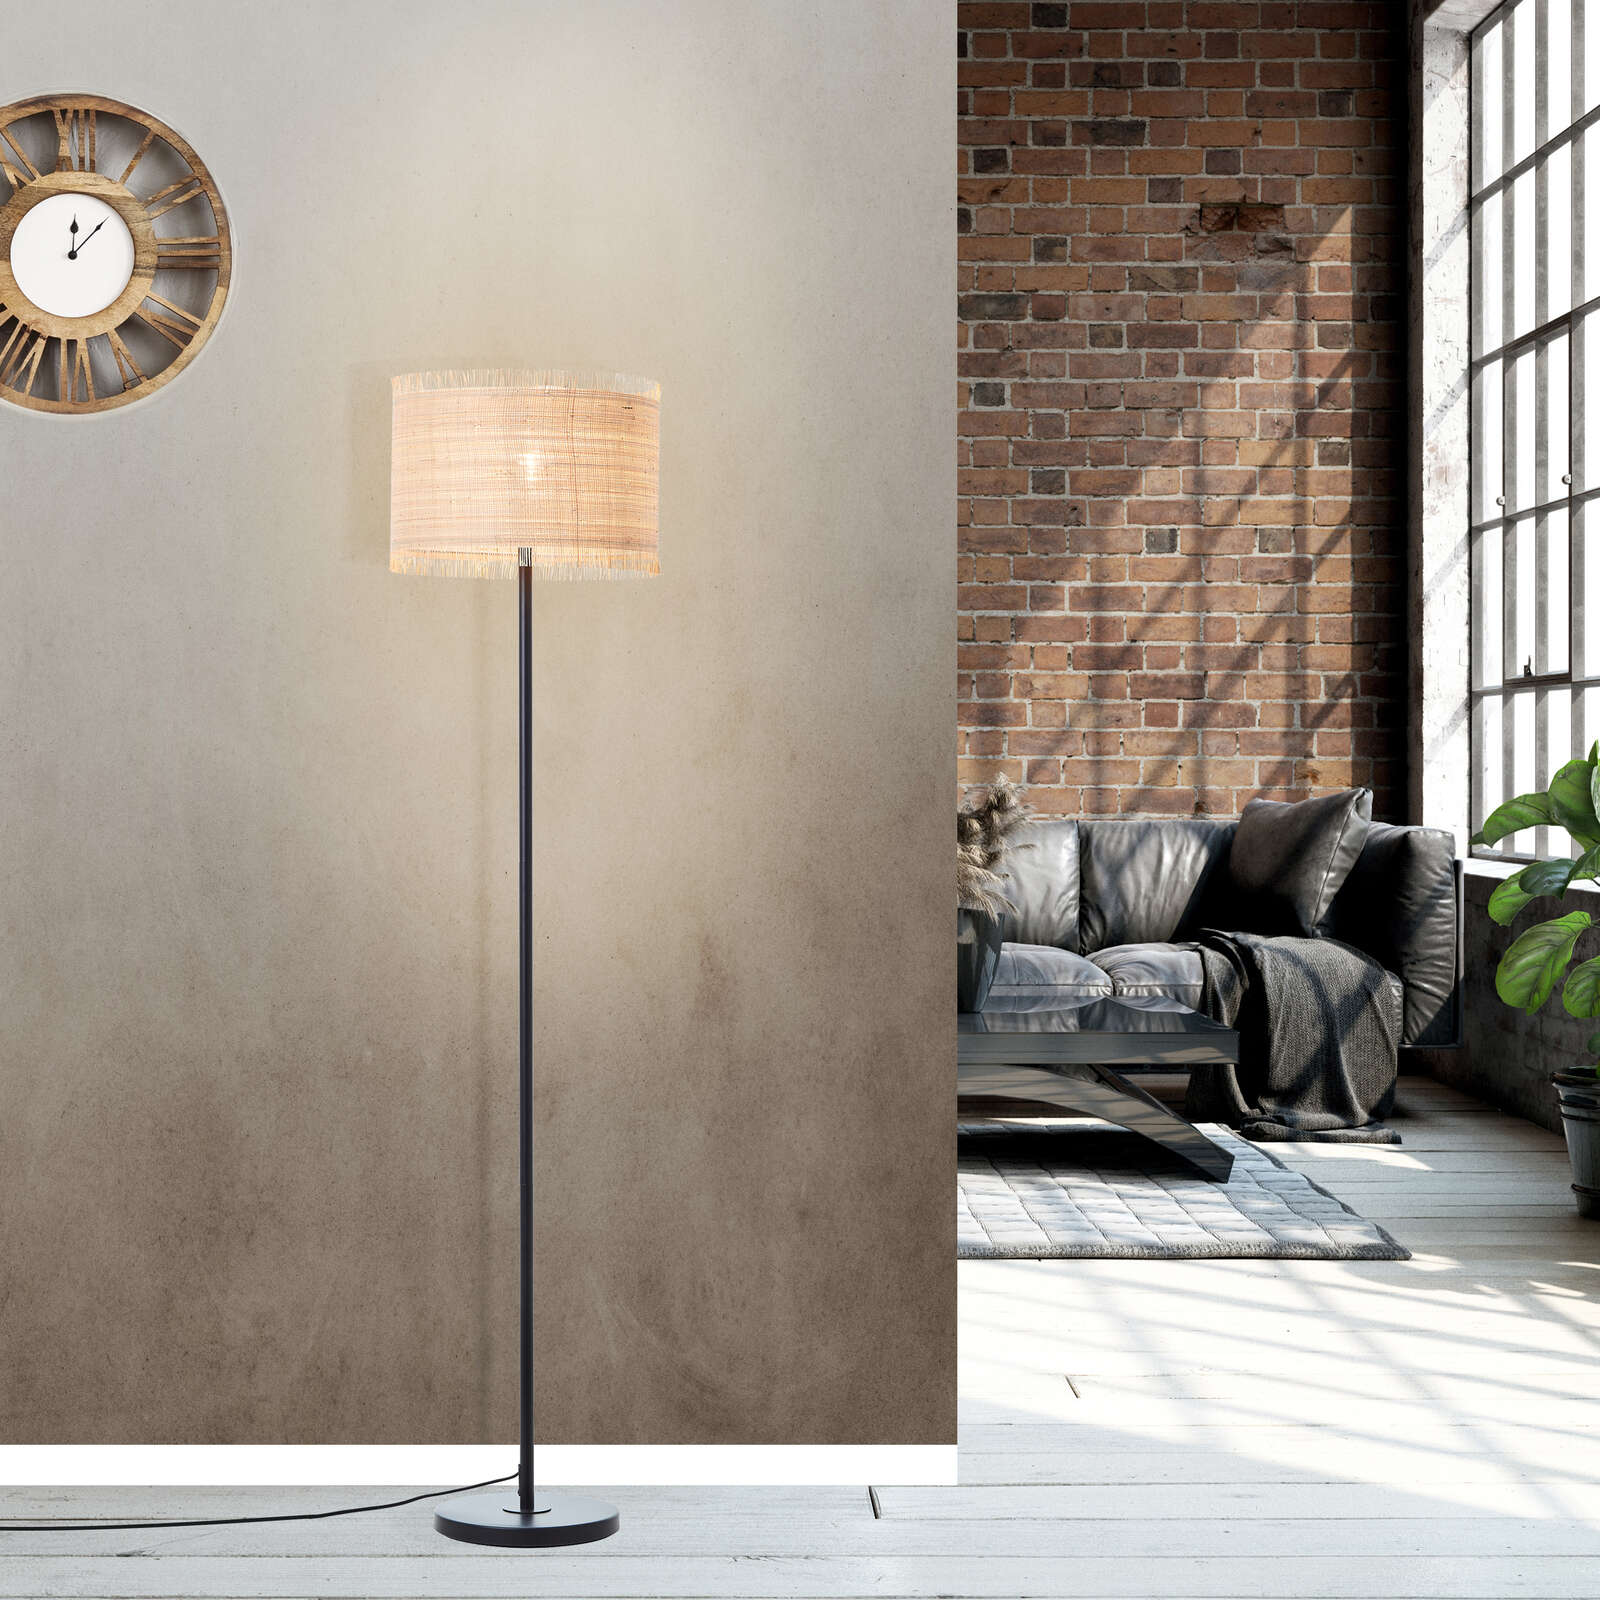             Floor lamp made of seagrass - Mateo 5 - Brown
        